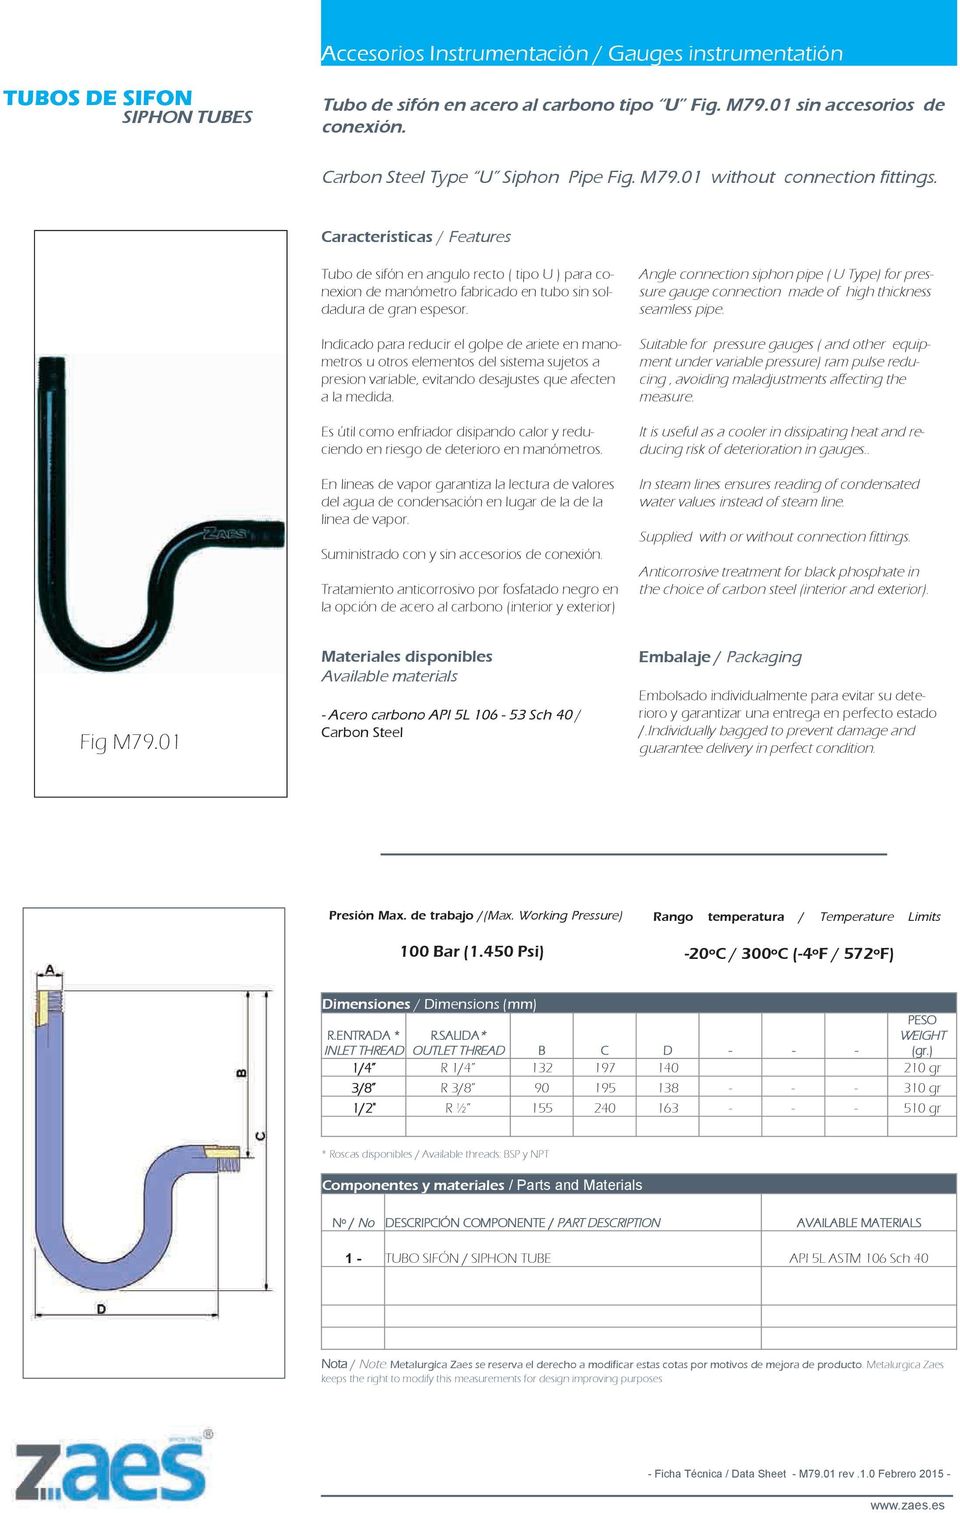 pipe ( U Type) for pressure gauge connection made of high thickness seamless pipe. Fig M79.